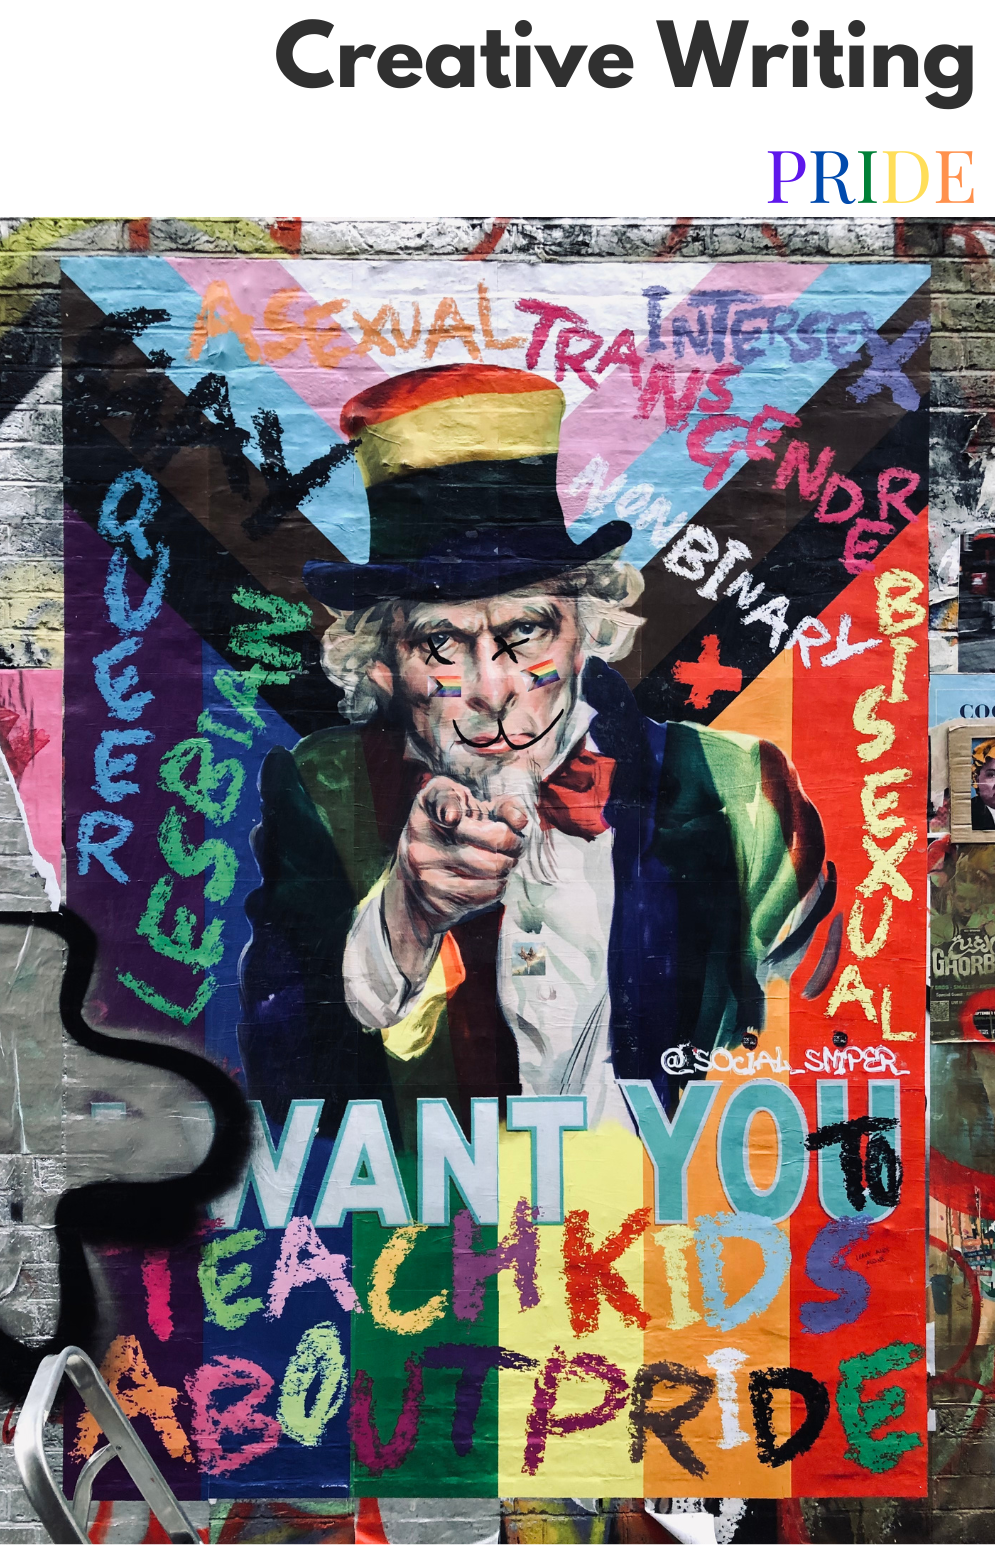 Graffiti image combining the Pride flag with Uncle Sam. 